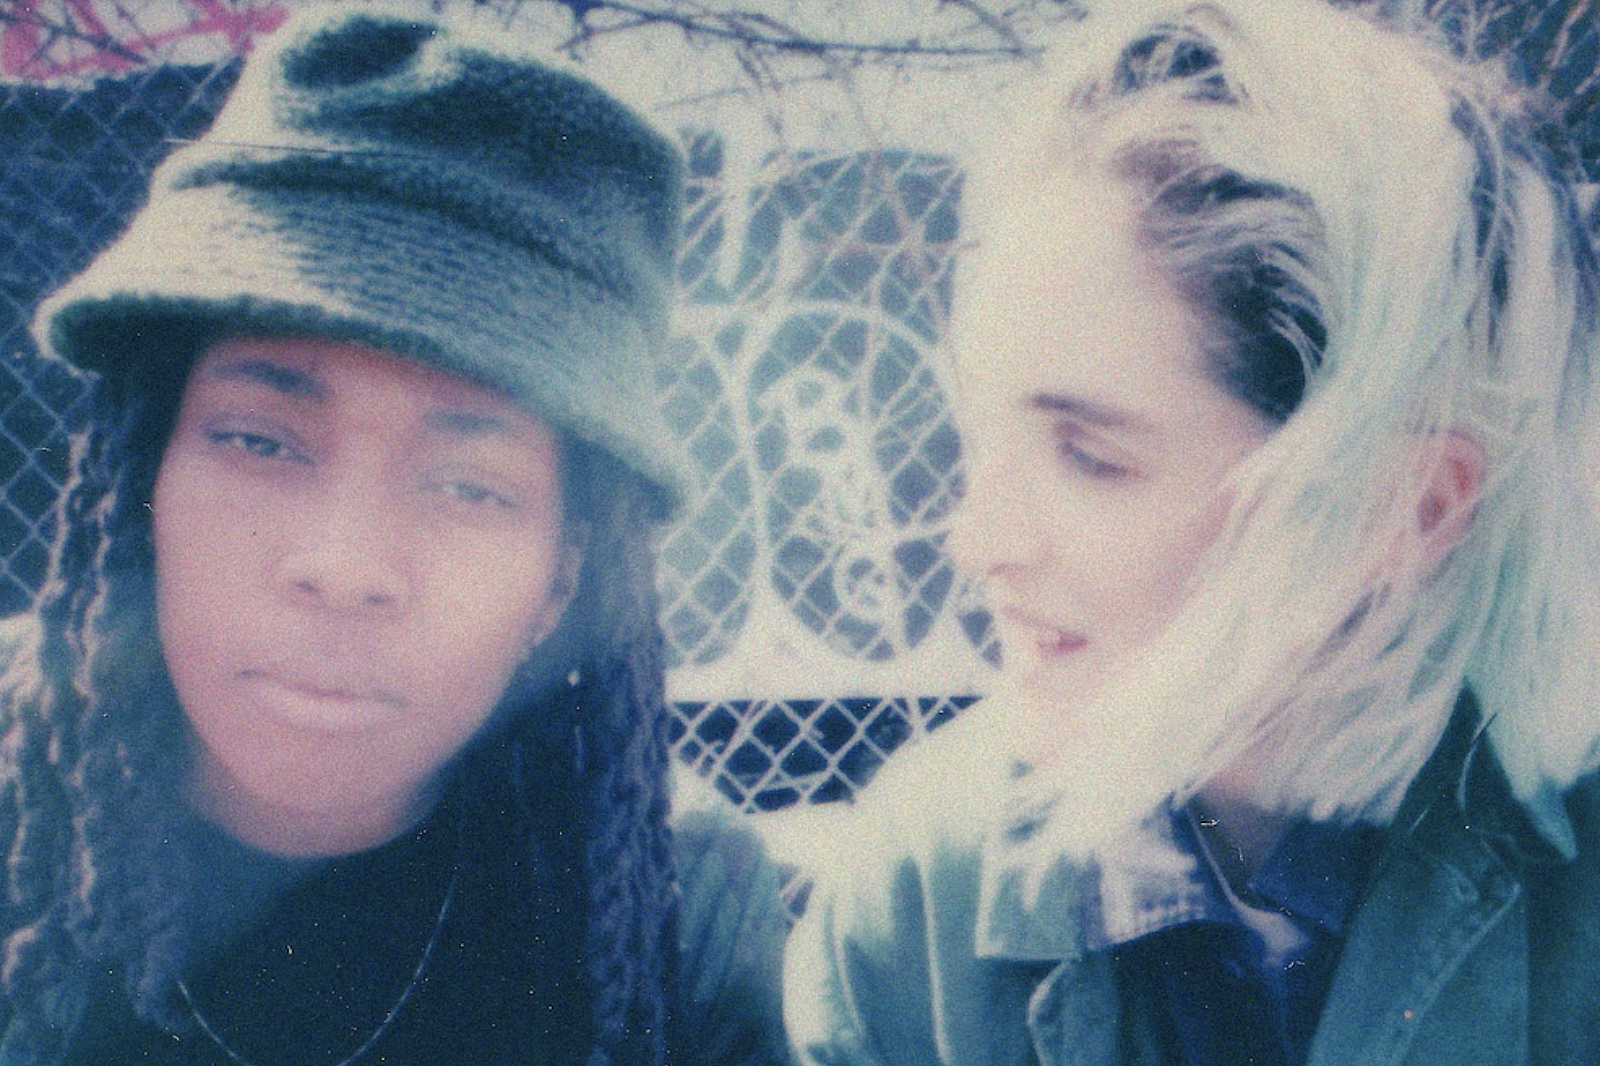 Shura teams up with rapper Ivy Sole on new song 'elevator girl'